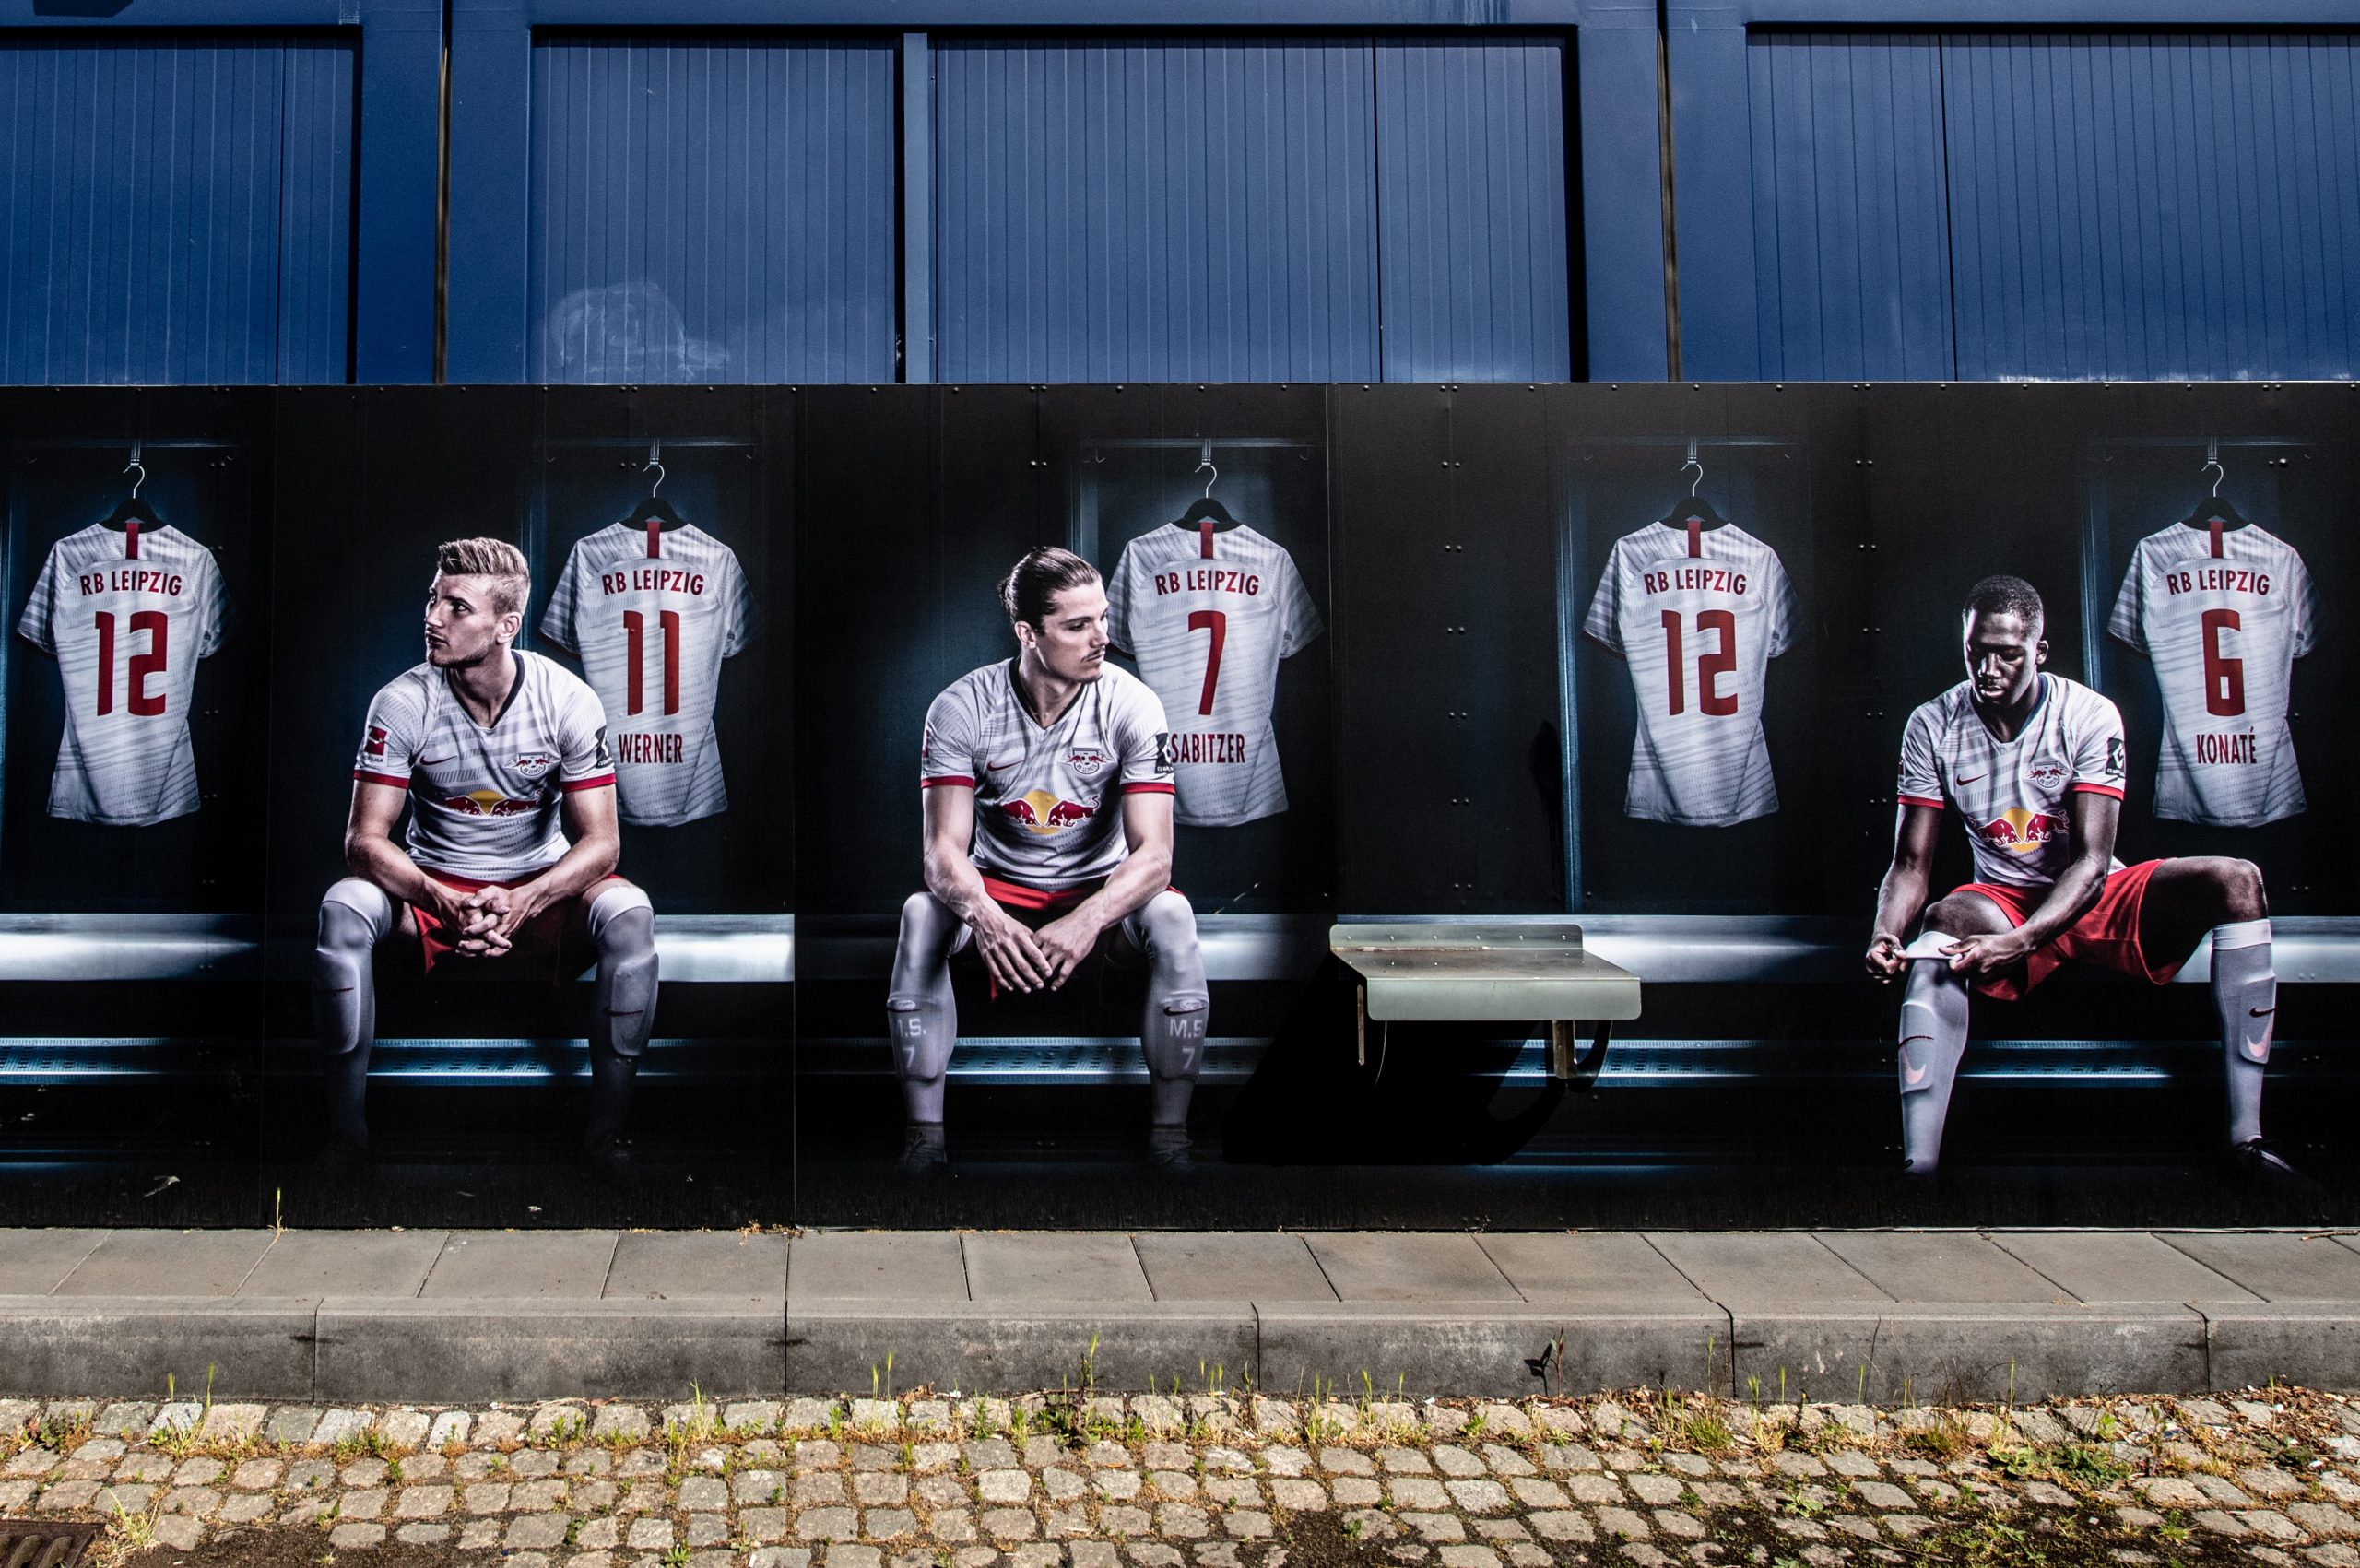 epa08402268 Painting shows German Bundesliga RB Leipzig  players (L-R) Timo Werner, Marcel Sabitzer and Ibrahima Konate on wall of club's  fanshop in Leipzig, Germany, 05 May 2020. The German Football Association (DFL) has presented a comprehensive concept for the resumption of play amid the ongoing coronavirus COVID-19 pandemic. In order to slow down the spread of the COVID-19 disease caused by the SARS-CoV-2 coronavirus, the Bundesliga has been on a break since 13 March 2020.  EPA/FILIP SINGER